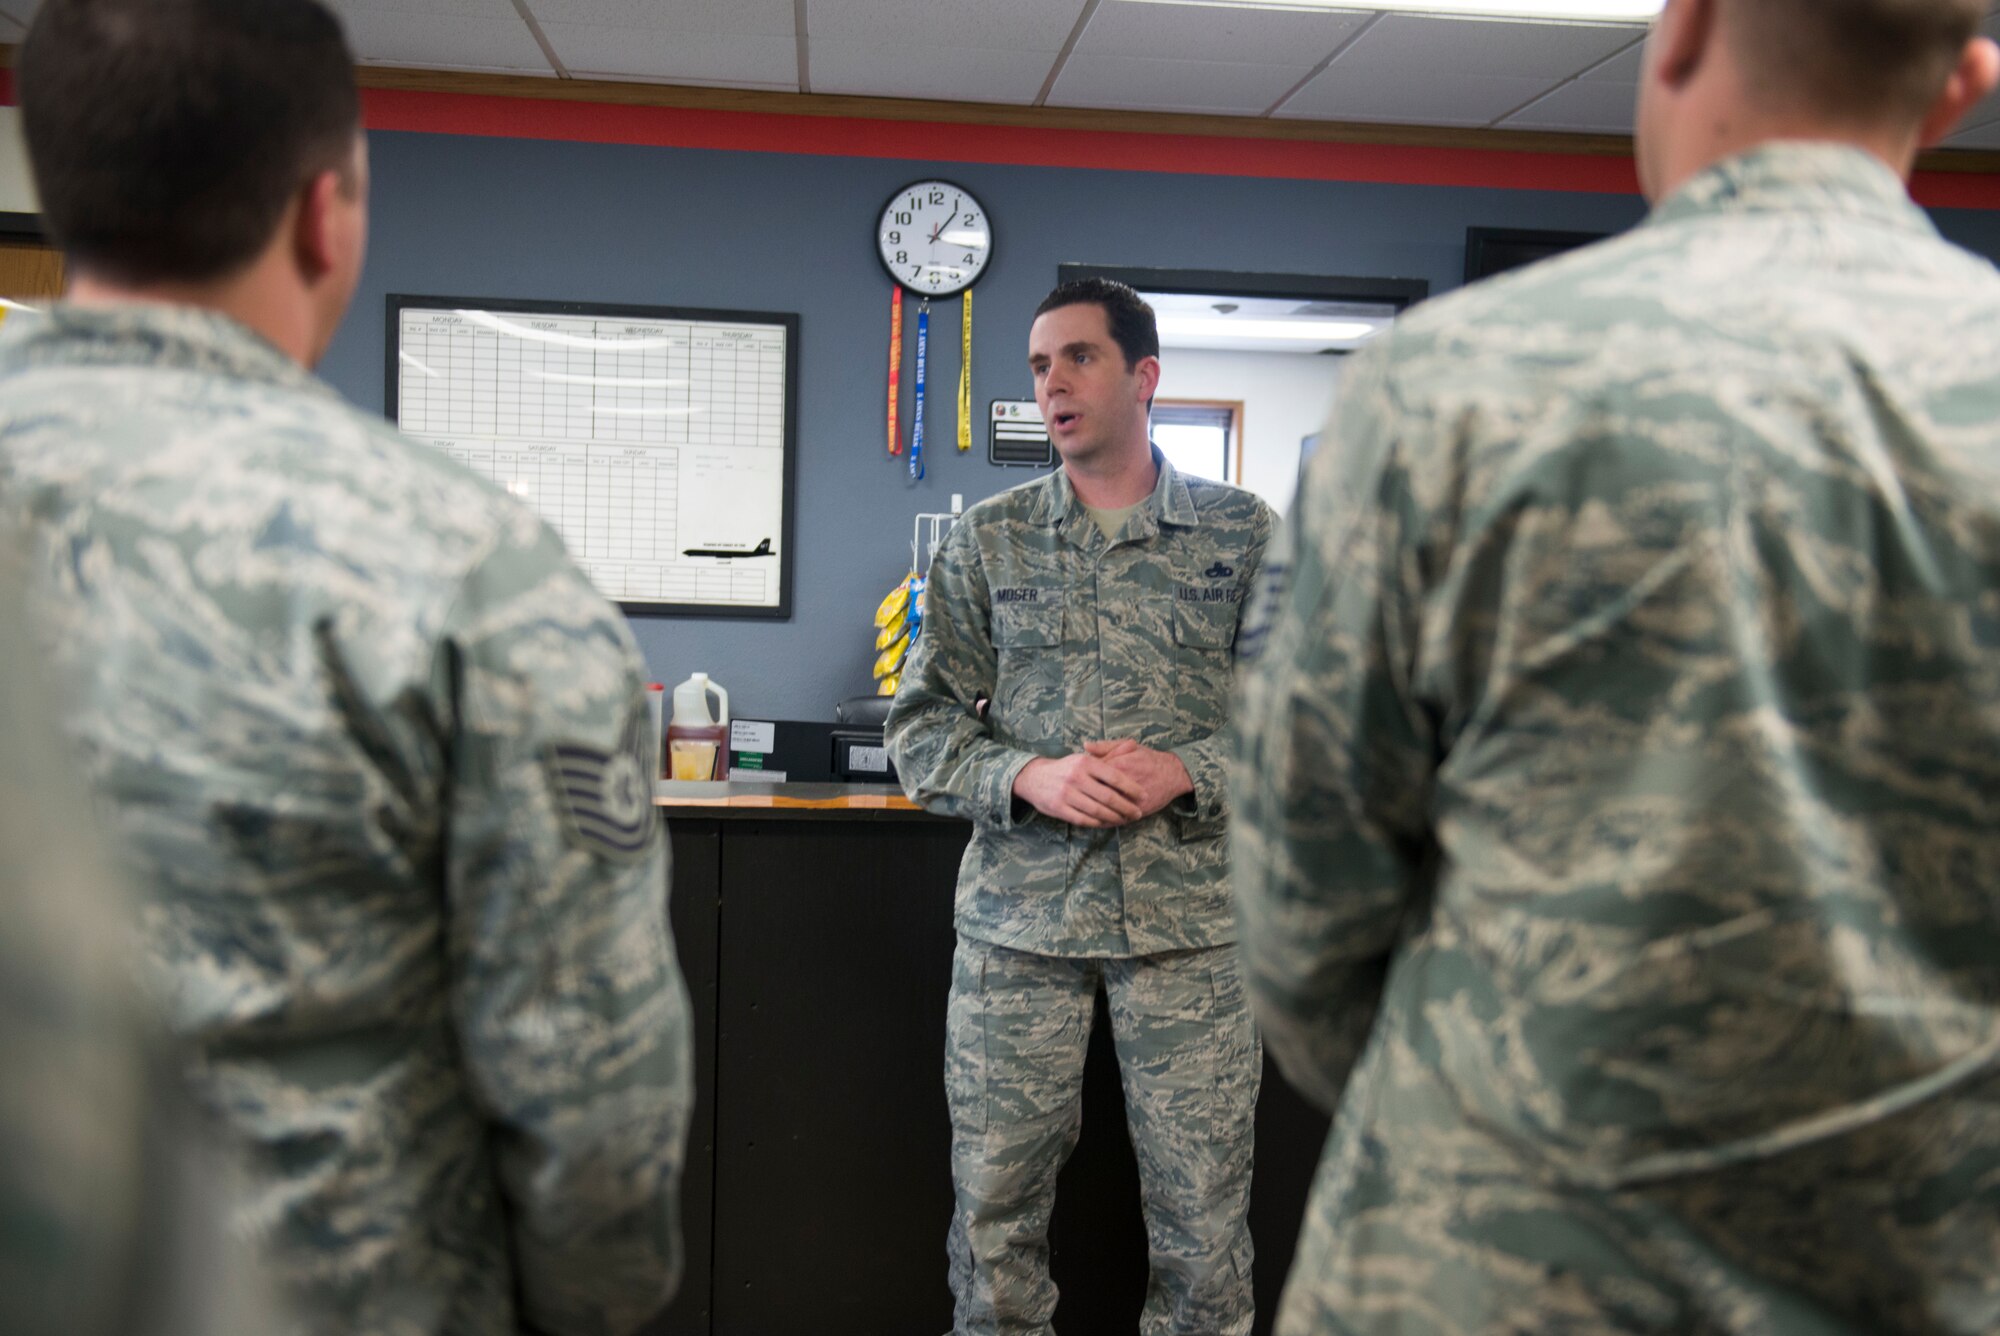 Senior Master Sgt. Michael B. Moser, the superintendent for the 23rd Aircraft Maintenance Unit, instructs his Airmen at Minot Air Force Base, N.D., May 7, 2014. Moser was recently awarded the Lieutenant General Leo Marquez award for superior service in maintenance. (U.S. Air Force photo/ Airman 1st Class Sahara L. Fales)